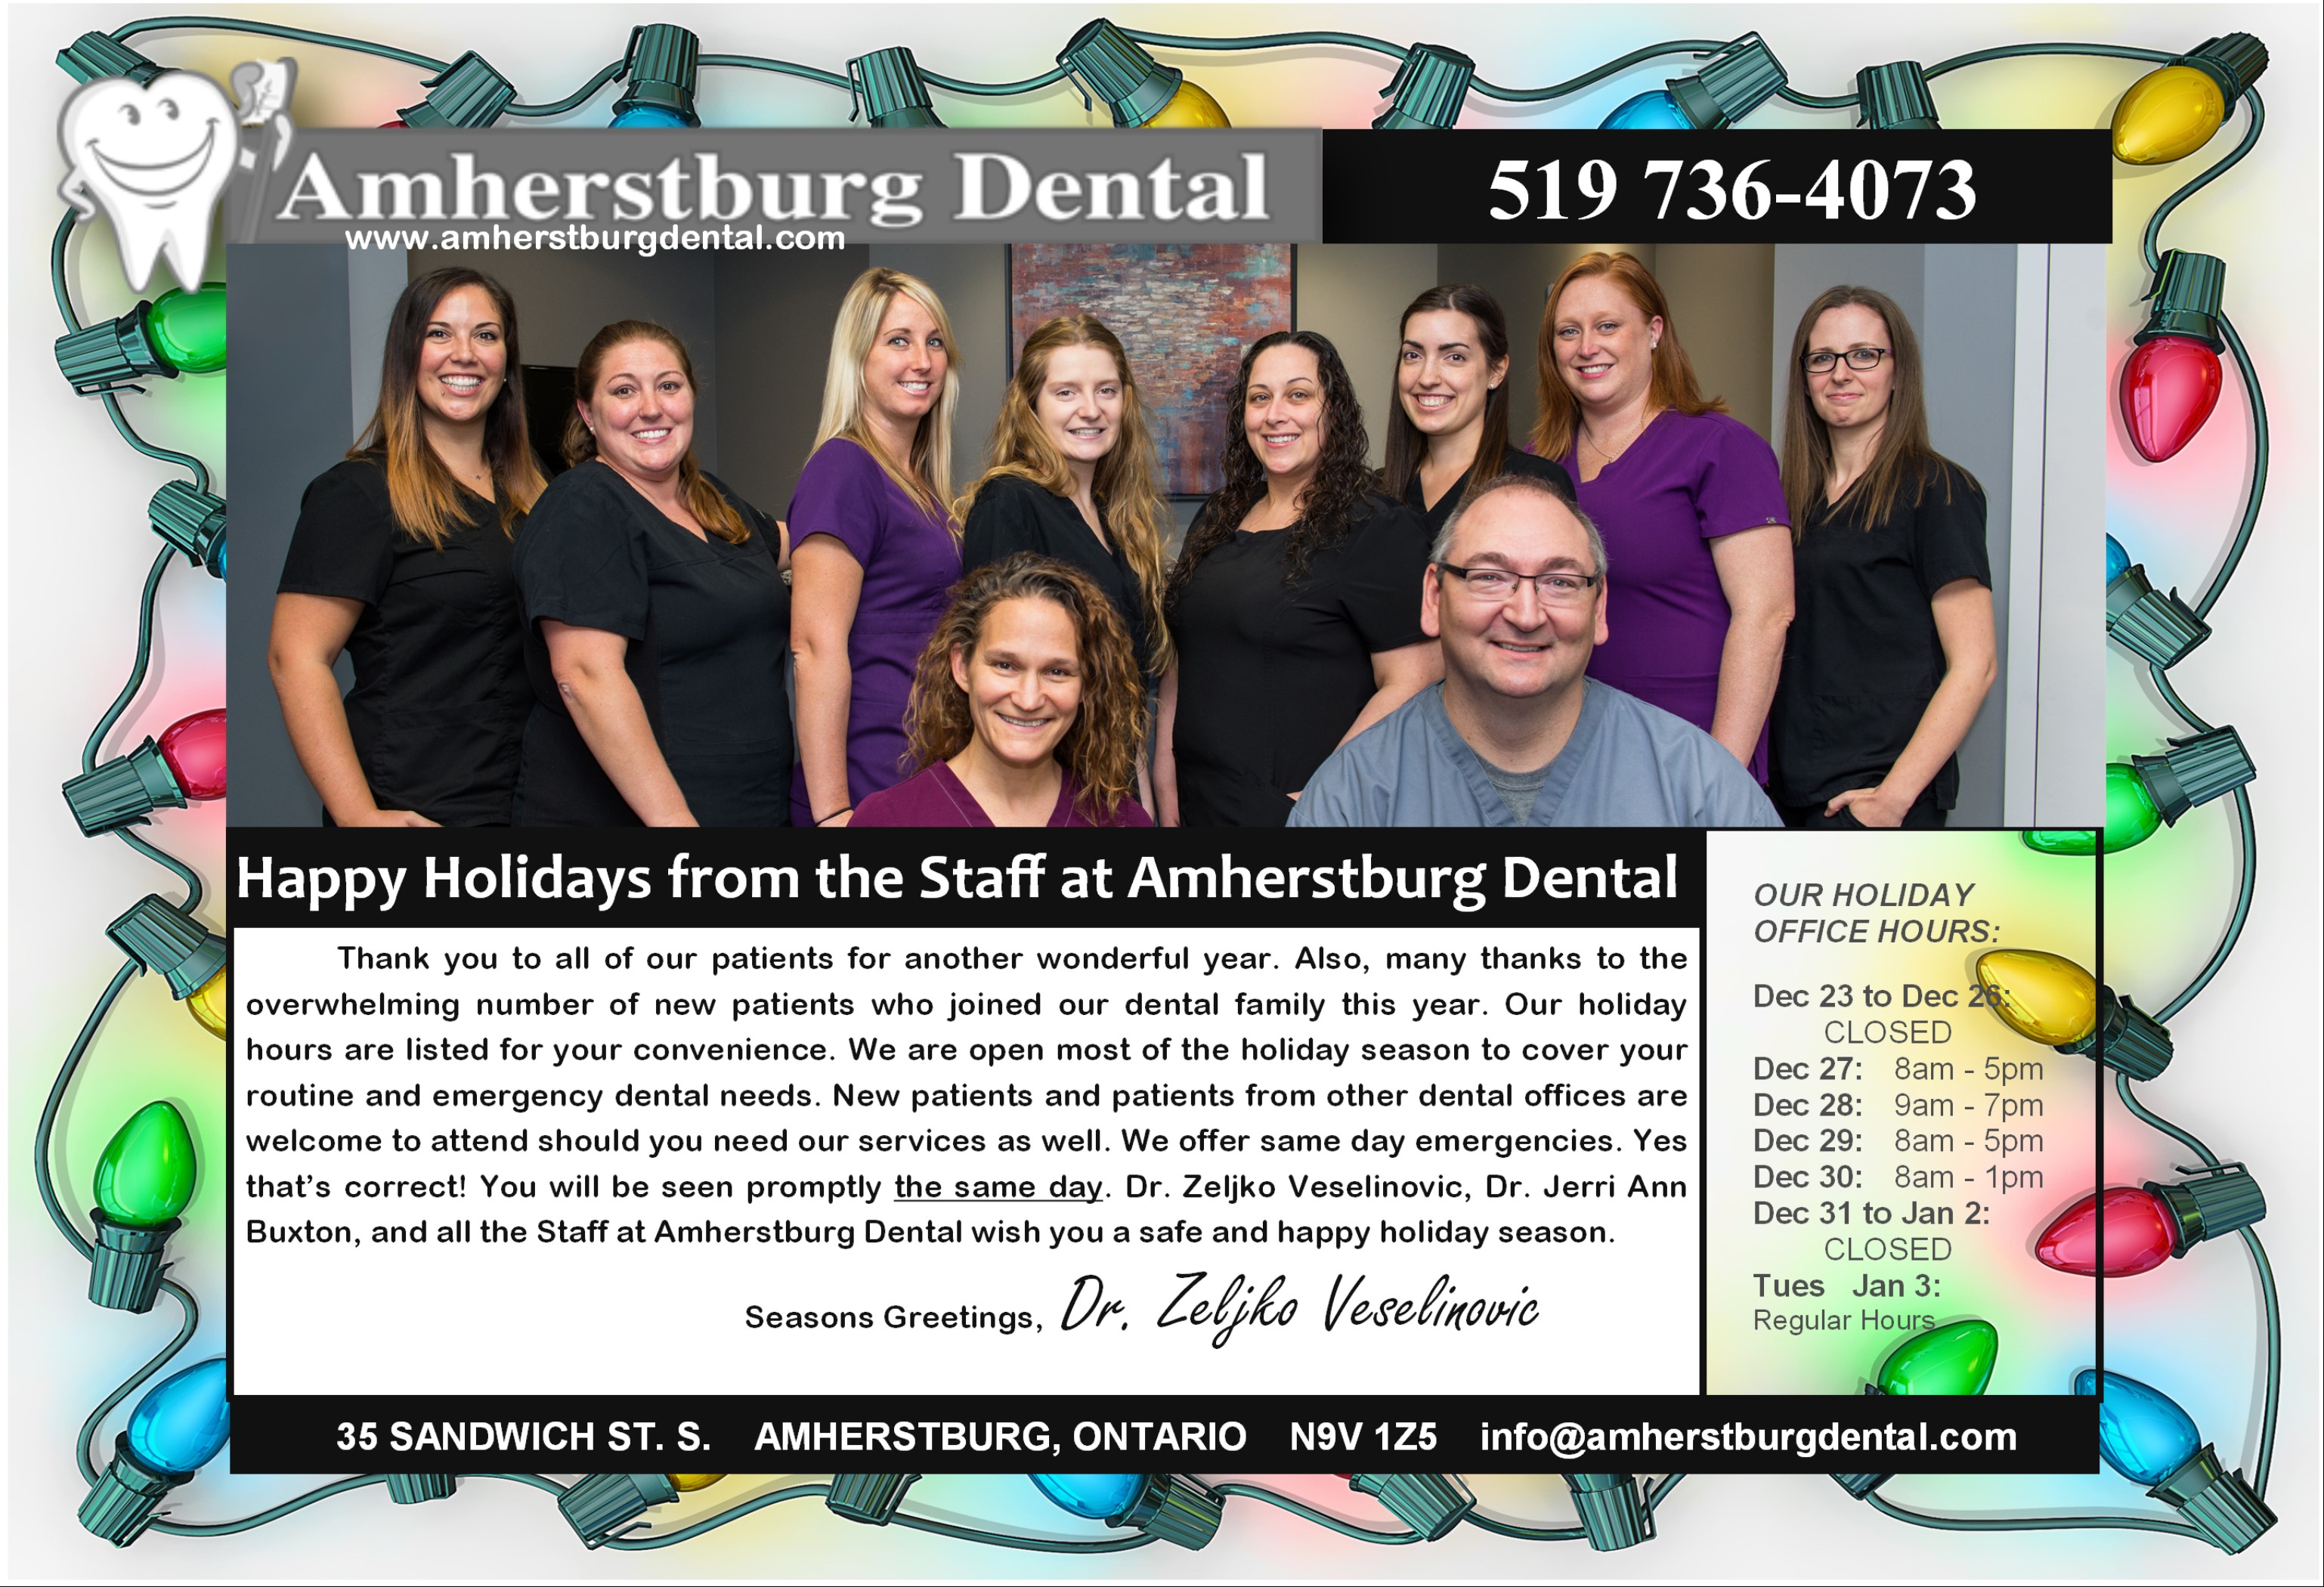 amherstburg-dental-holiday-hours-family-and-cosmetic-dentistry-amherstburg-ontario-windsor-ontario-essex-county-2016